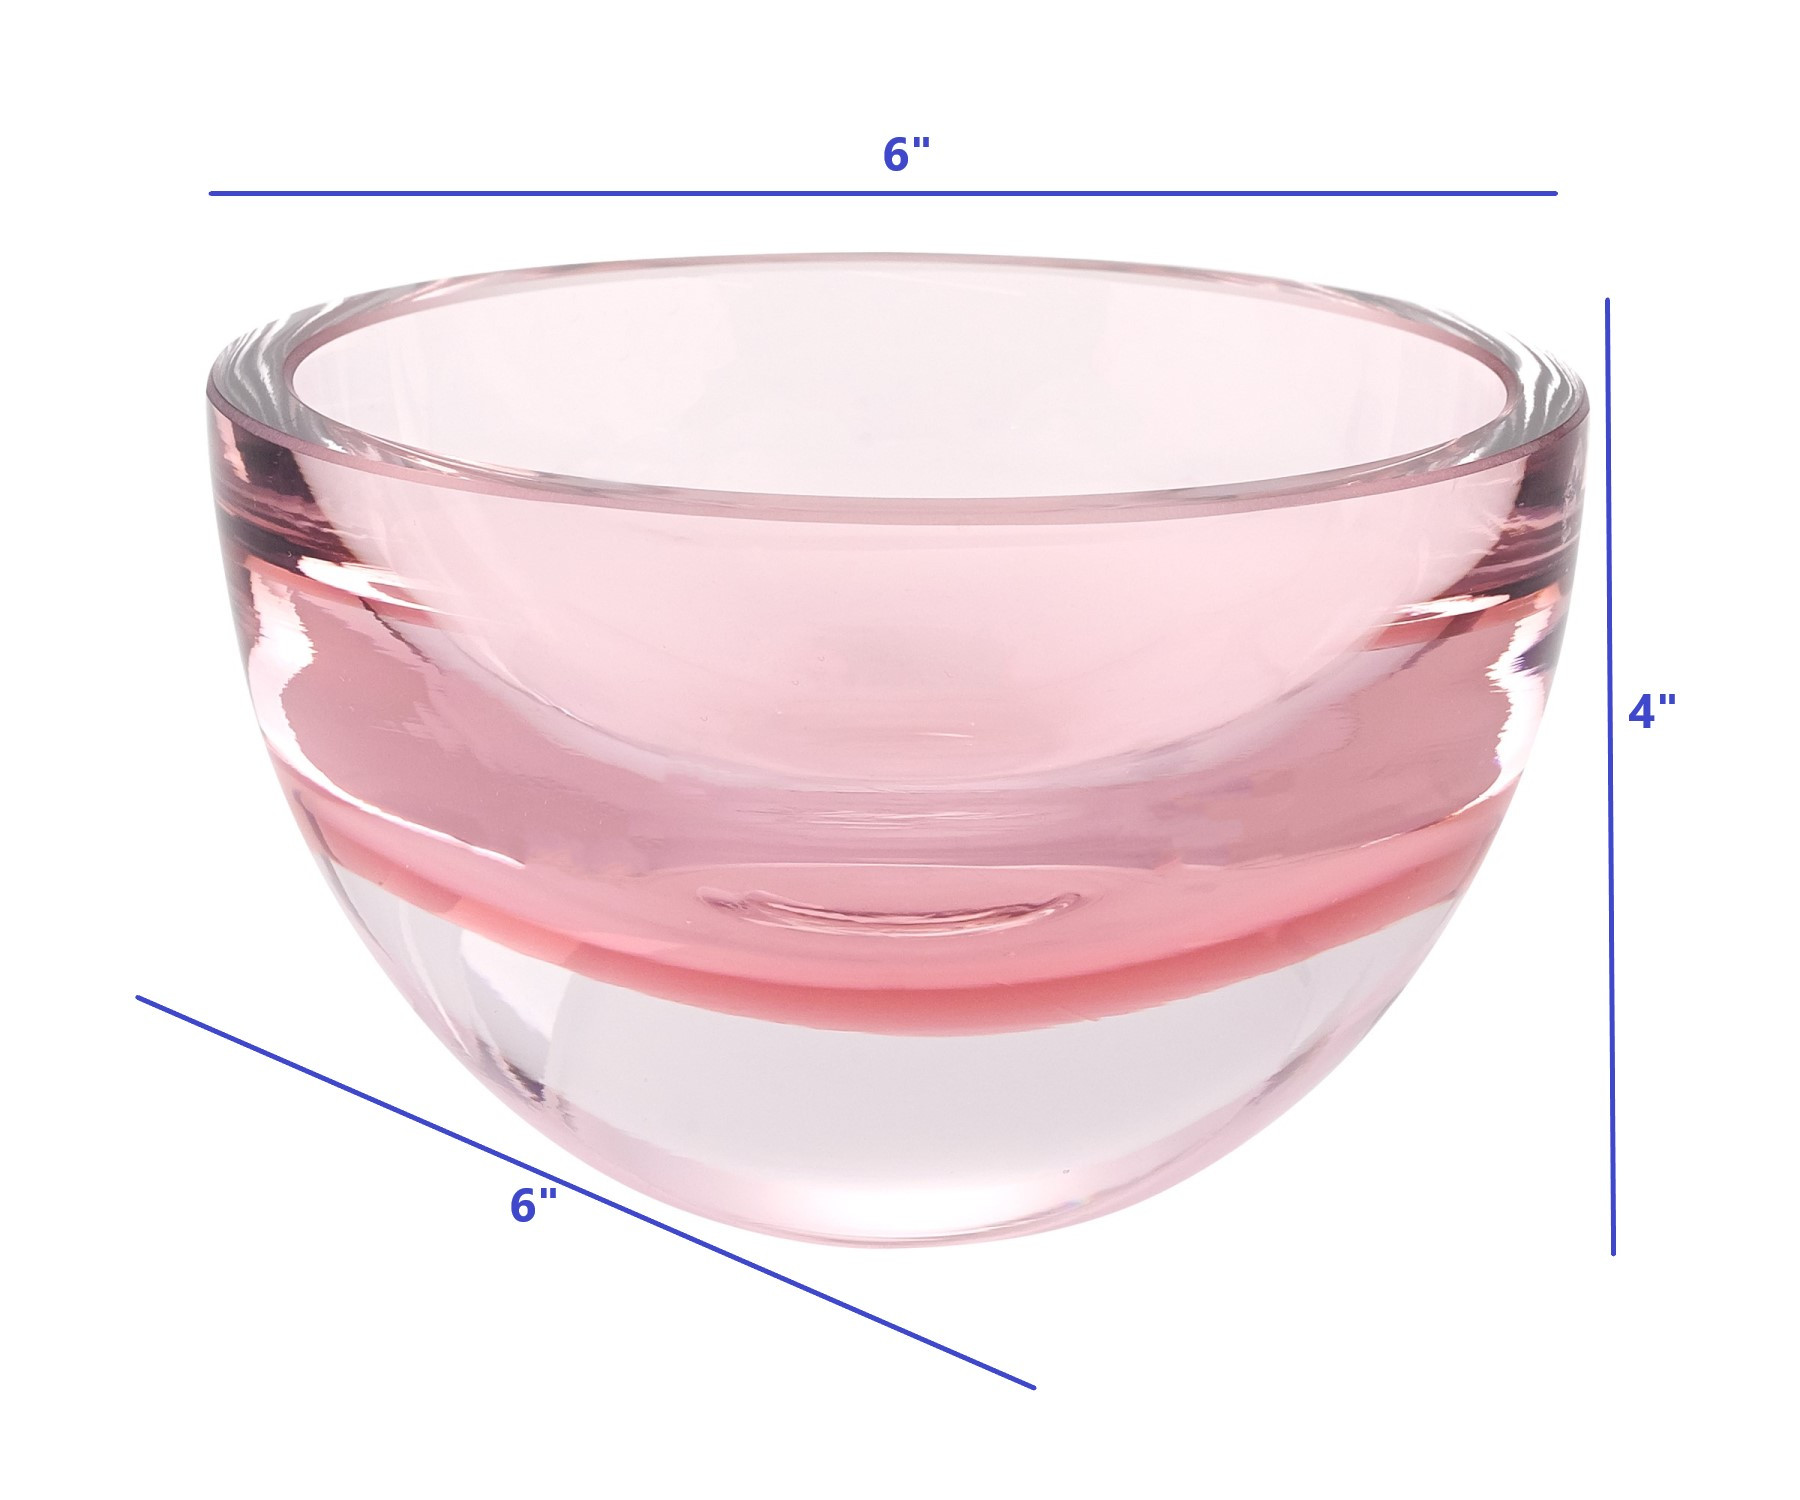 6" Mouth Blown European Made Lead Free Pink Crystal Bowl